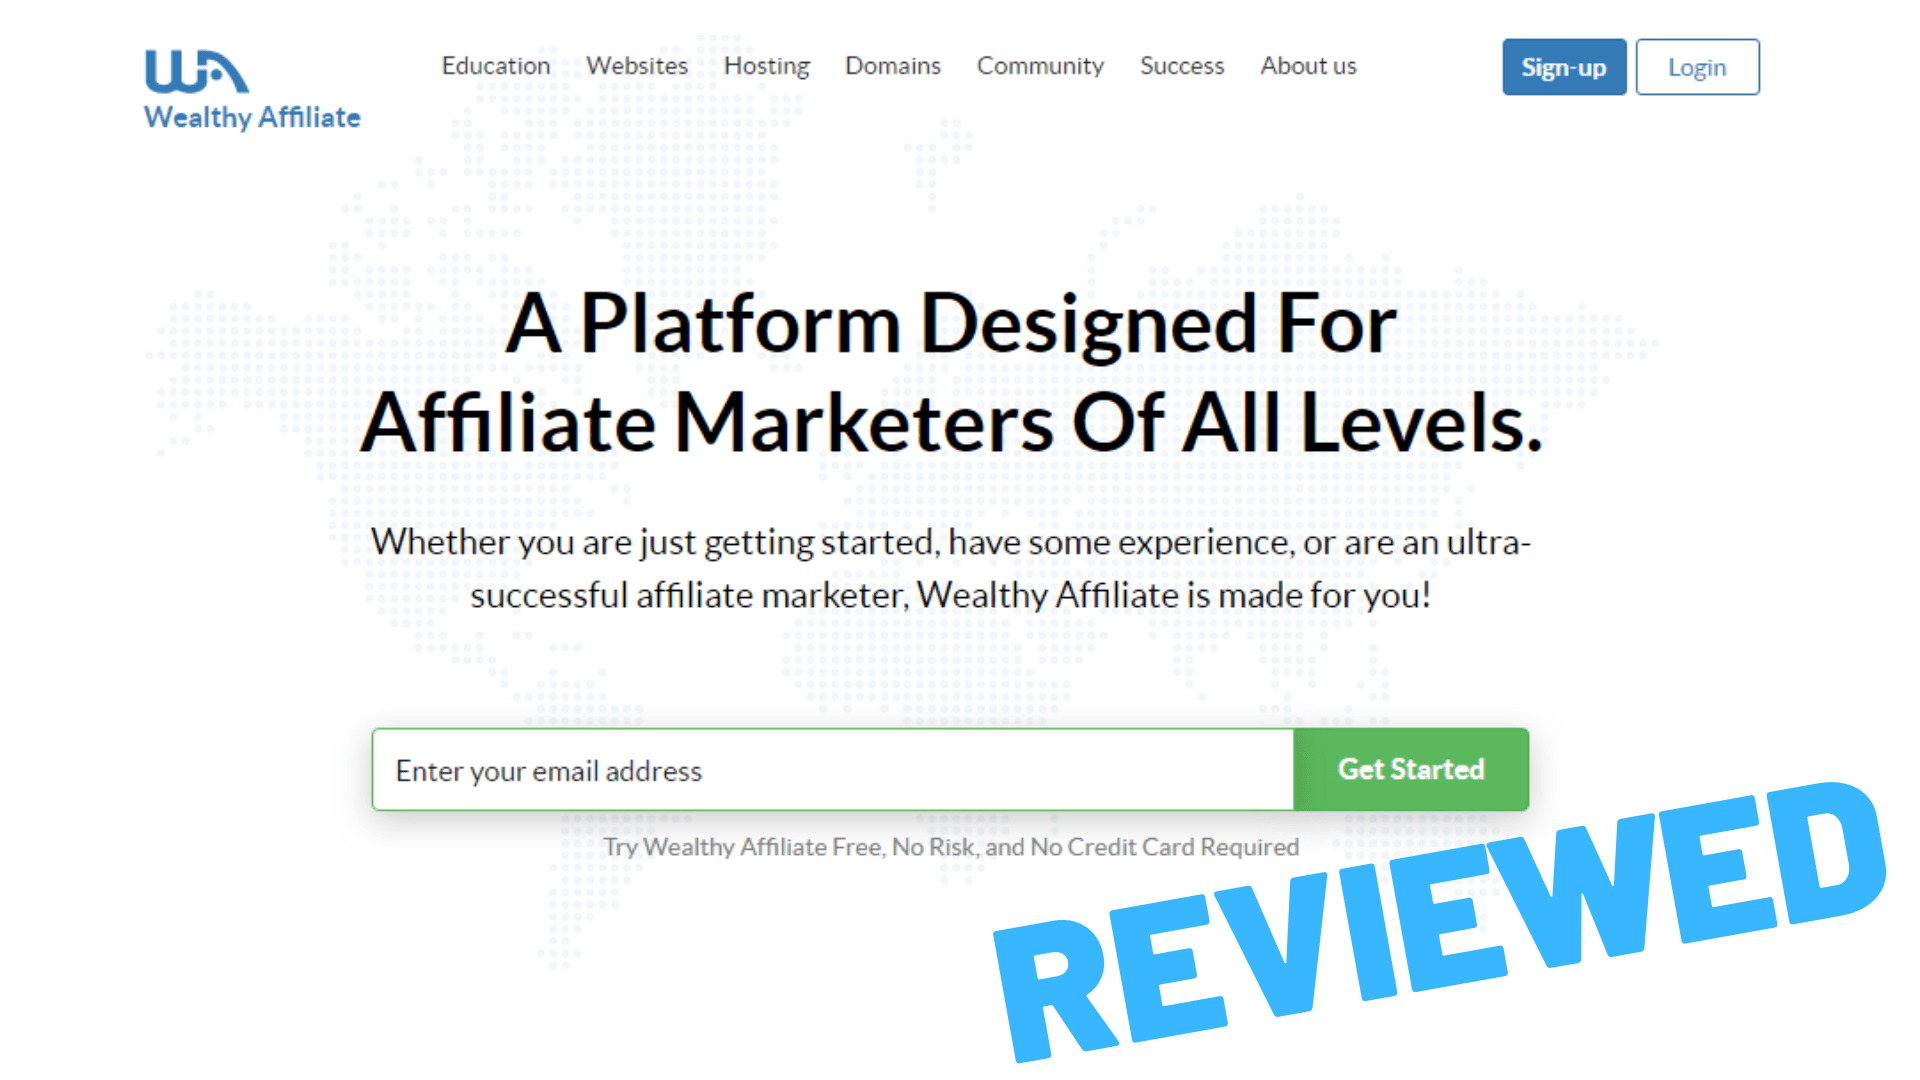 Review: Is Wealthy Affiliate Worth it?